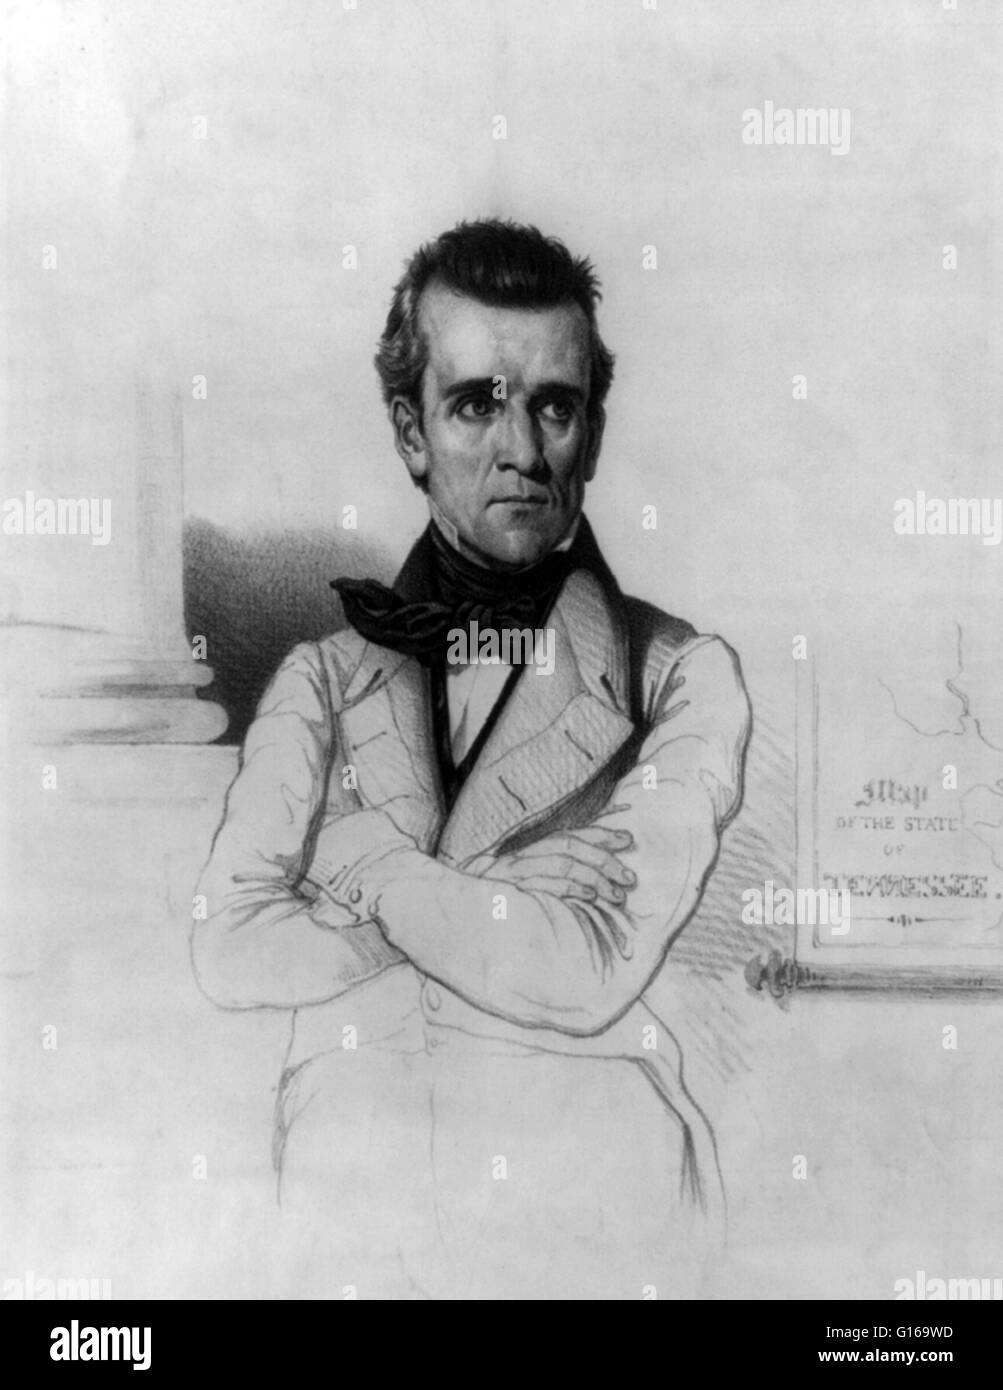 James Knox Polk (November 2, 1795 - June 15, 1849) was the 11th President of the United States (1845-1849). A Democrat, Polk served as the 17th Speaker of the House of Representatives (1835-1839) and Governor of Tennessee (1839-1841). He was the dark hors Stock Photo